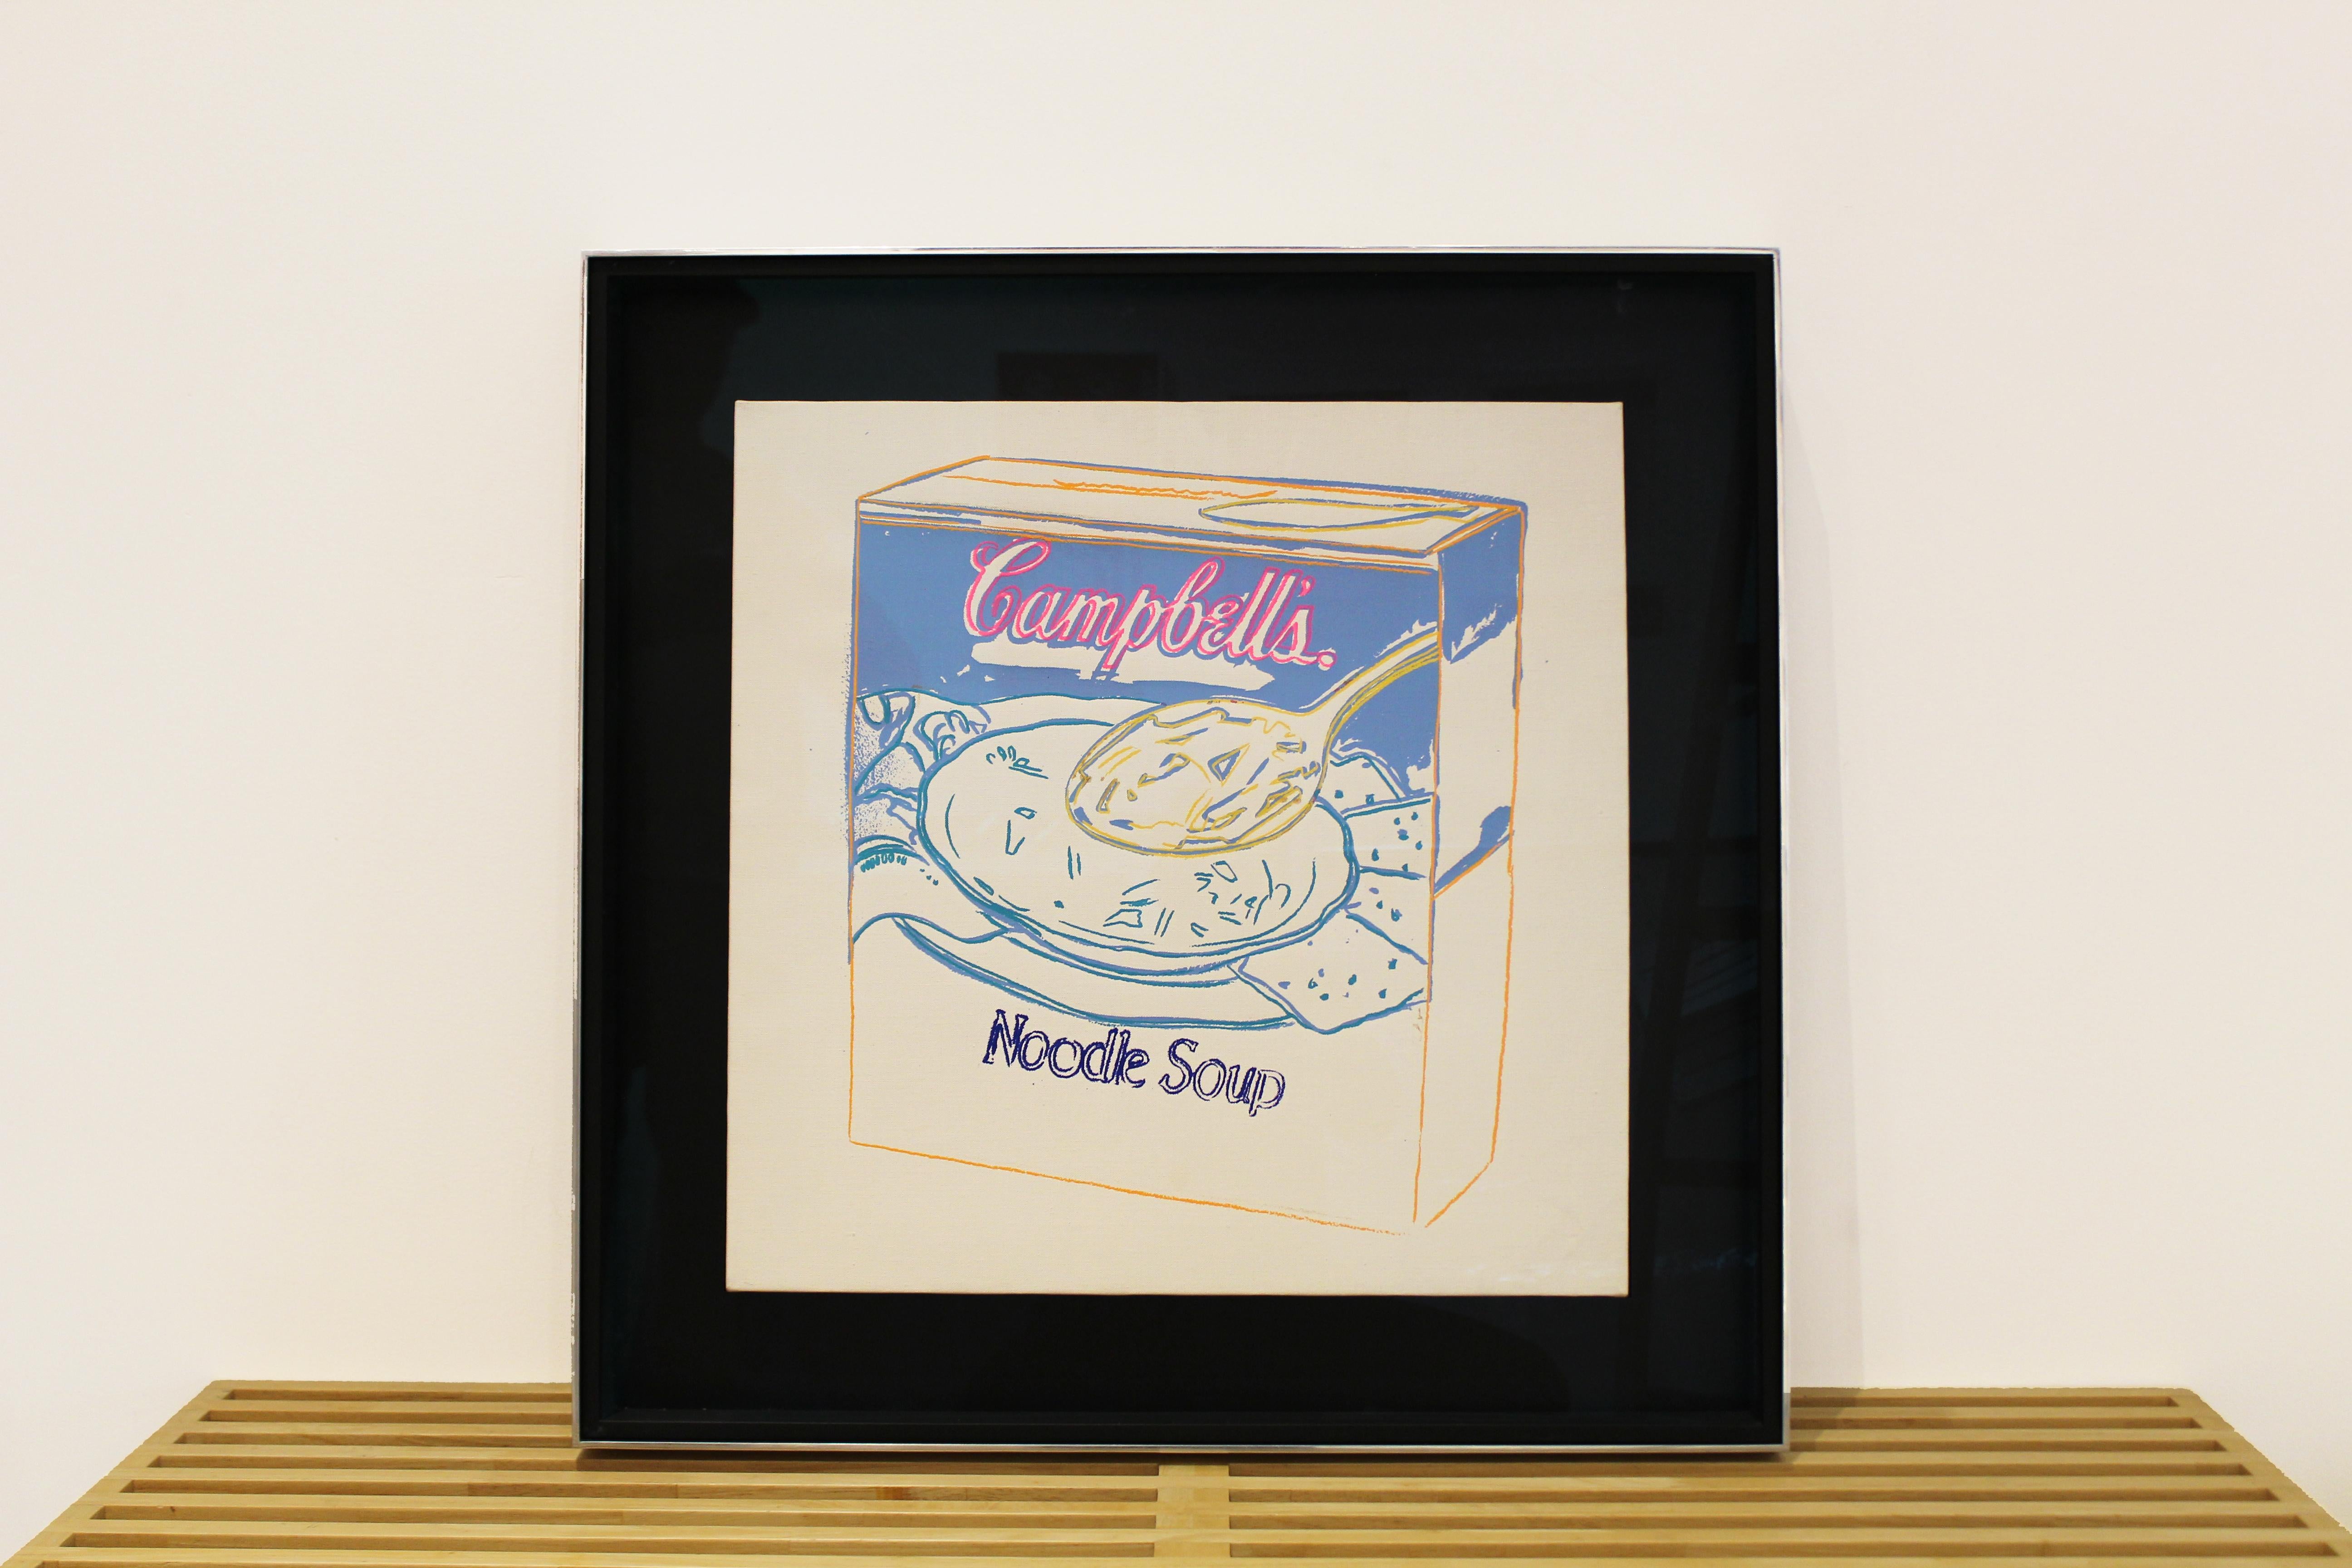 Campbell's Soup Box: Noodle Soup - Painting by Andy Warhol